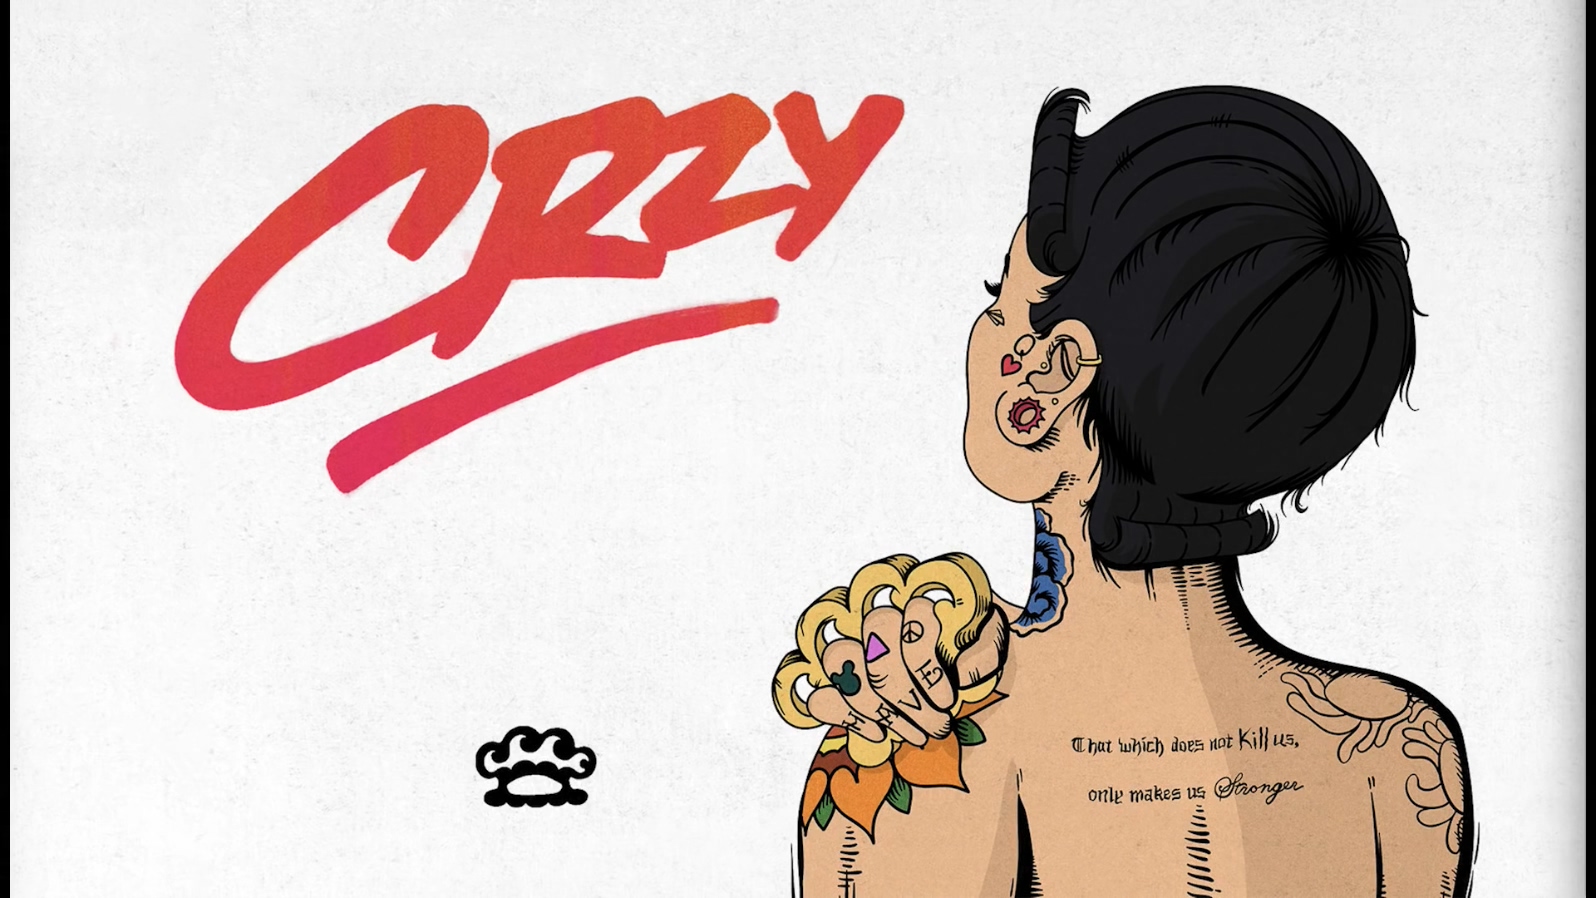 Kehlani - CRZY (Official Video) -